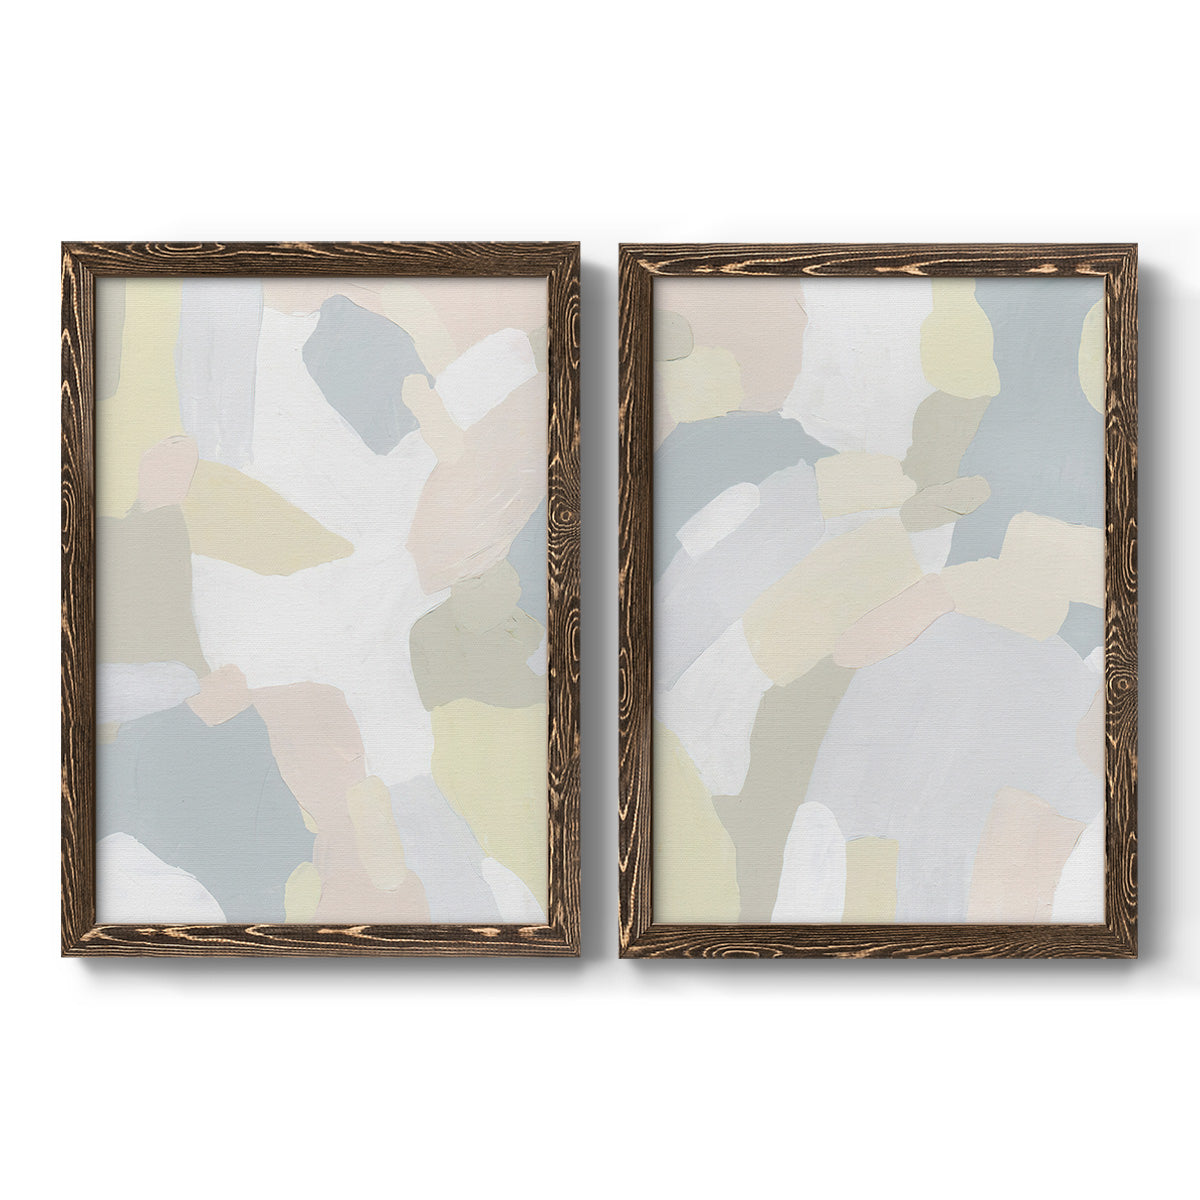 Sweet River I - Premium Framed Canvas 2 Piece Set - Ready to Hang